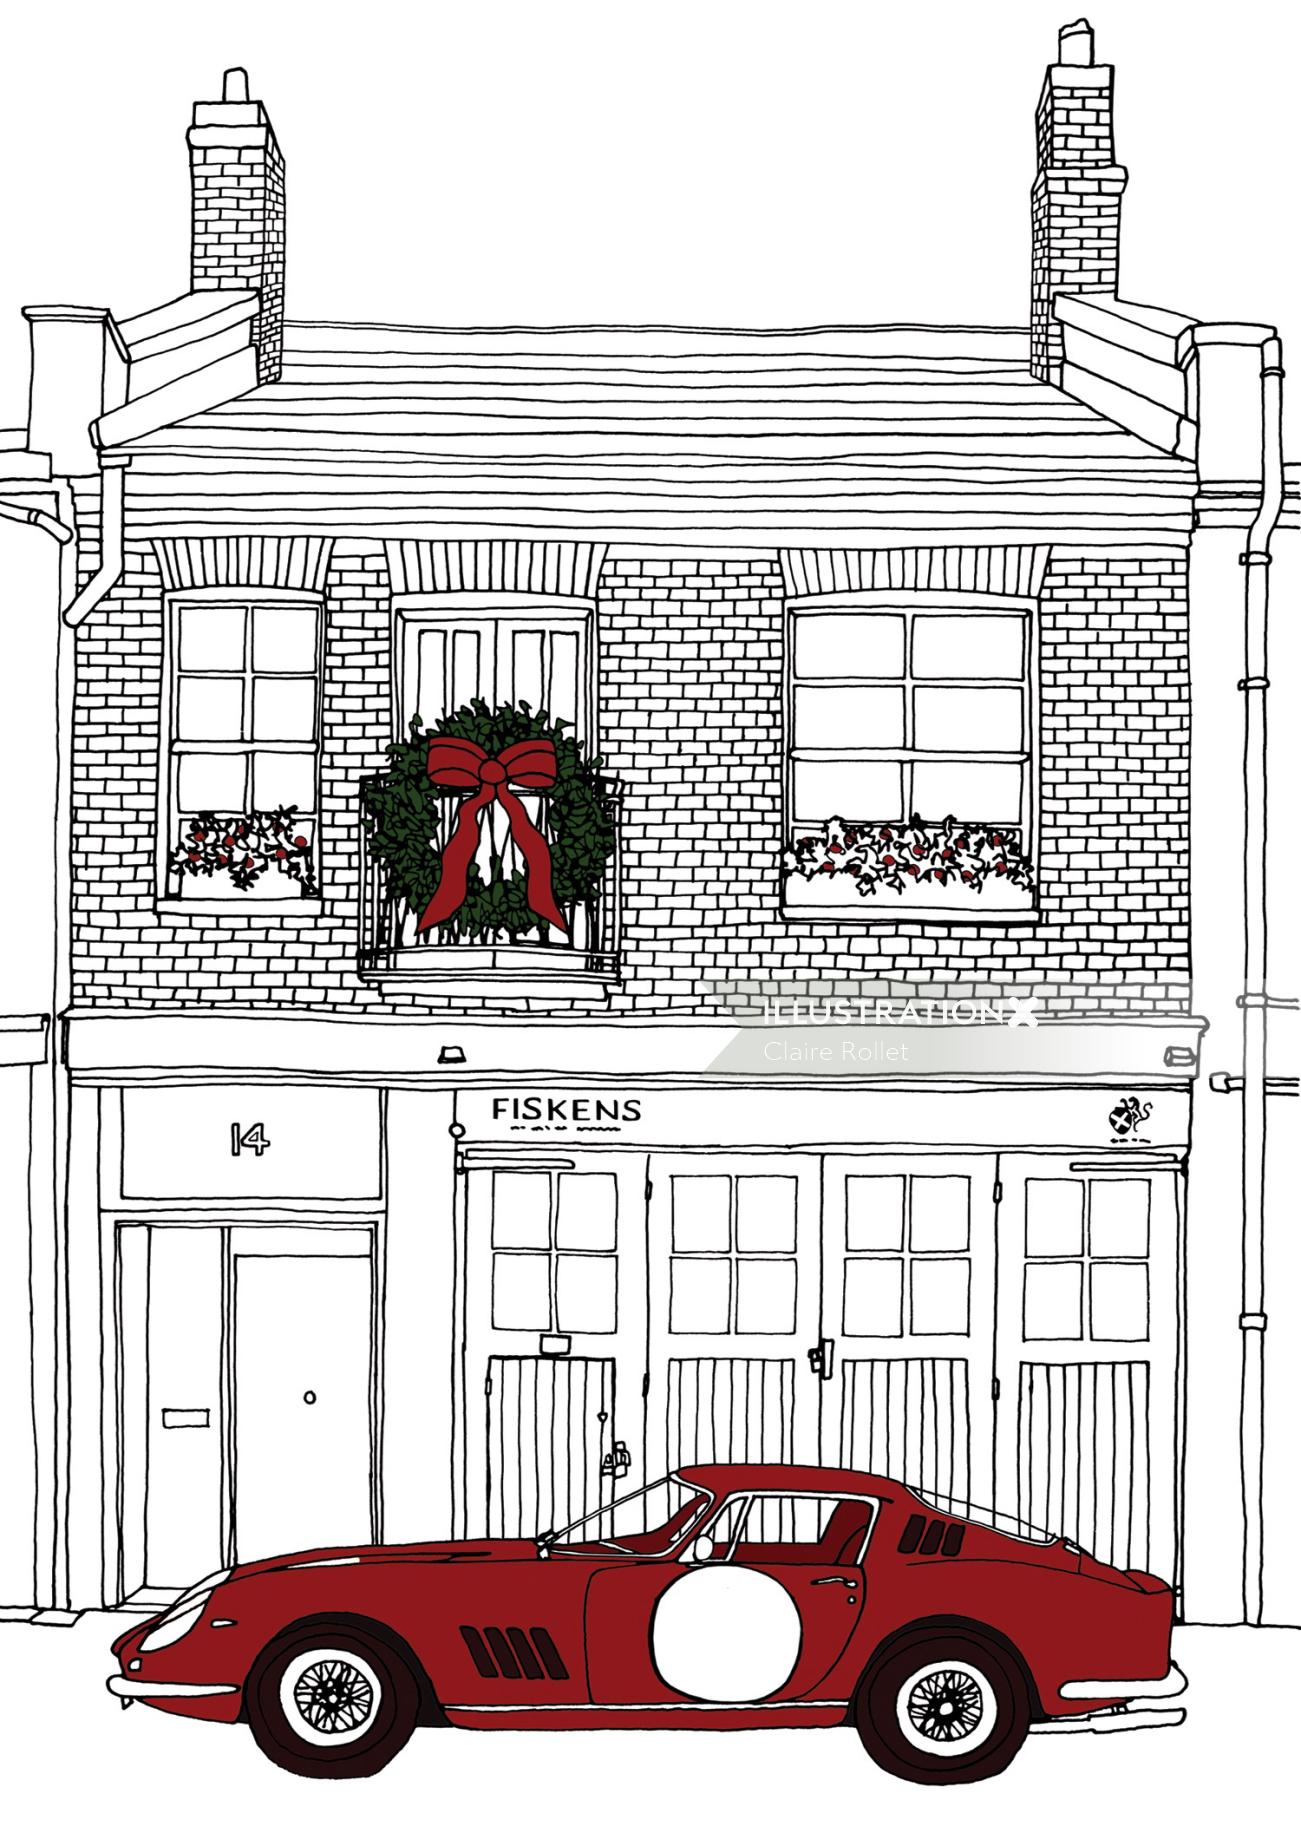 christmas, vintage, car, sport, city, house, traditional